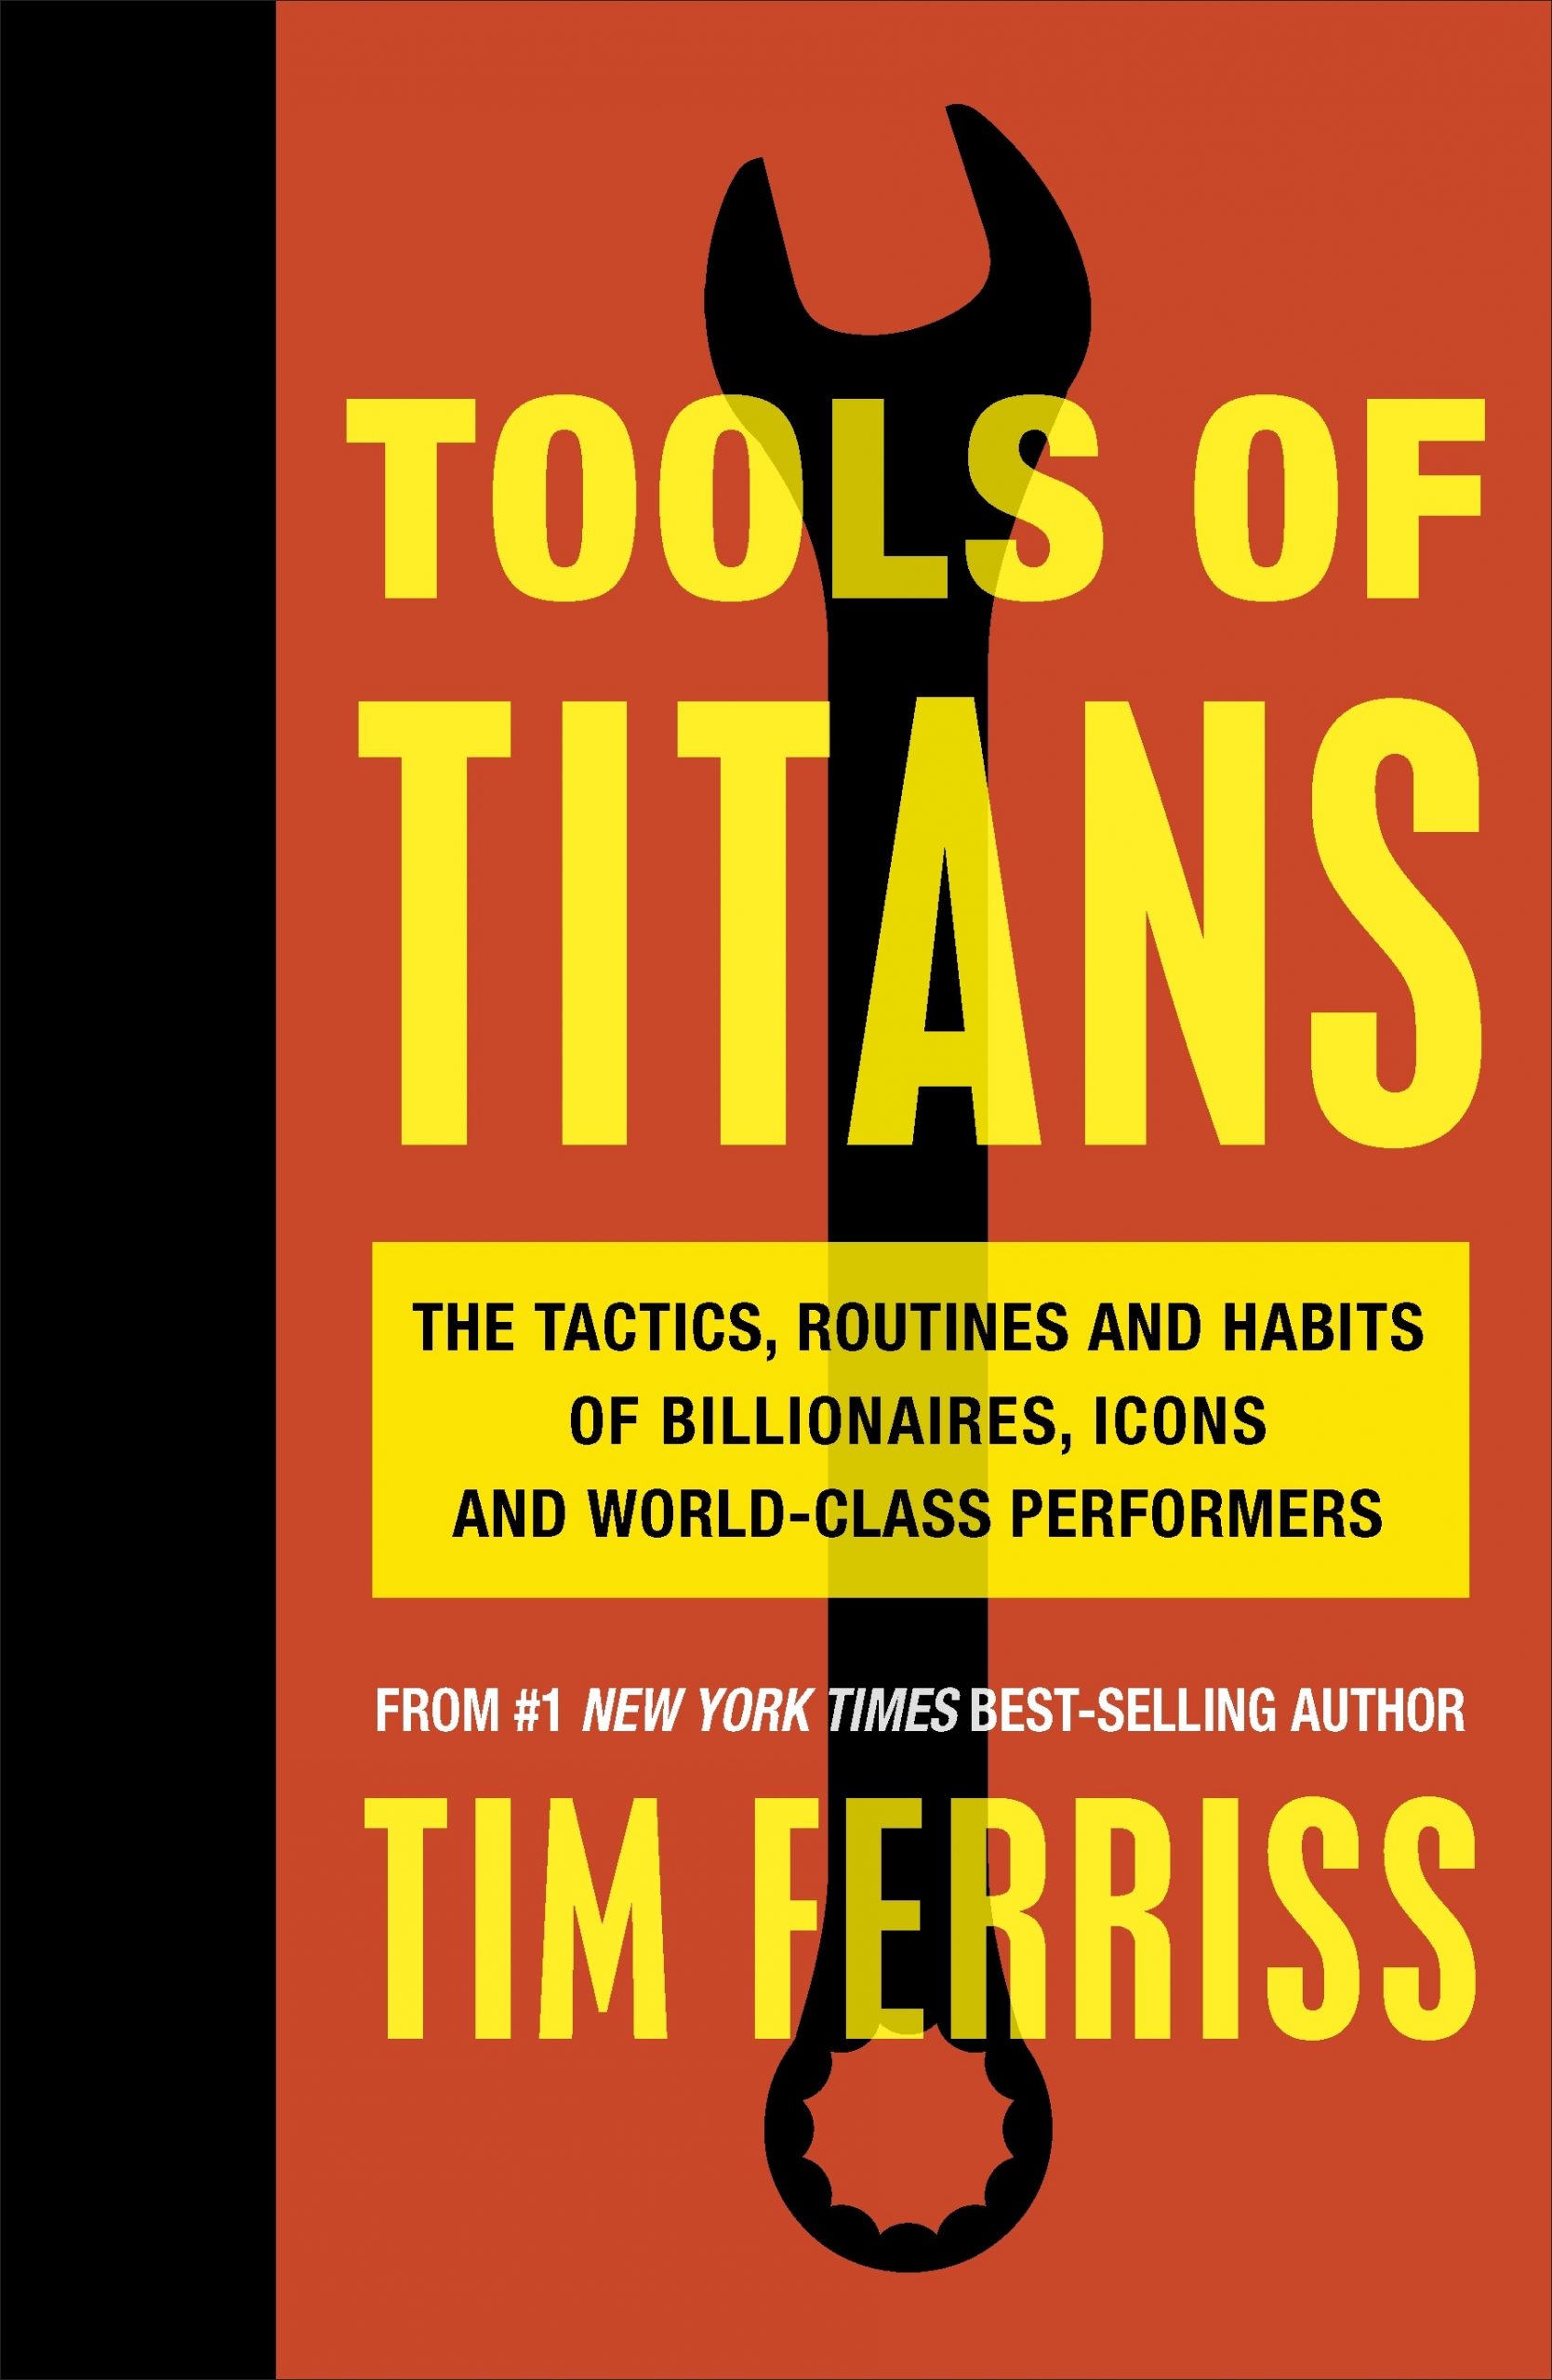 Tools of Titans by Tim Ferris